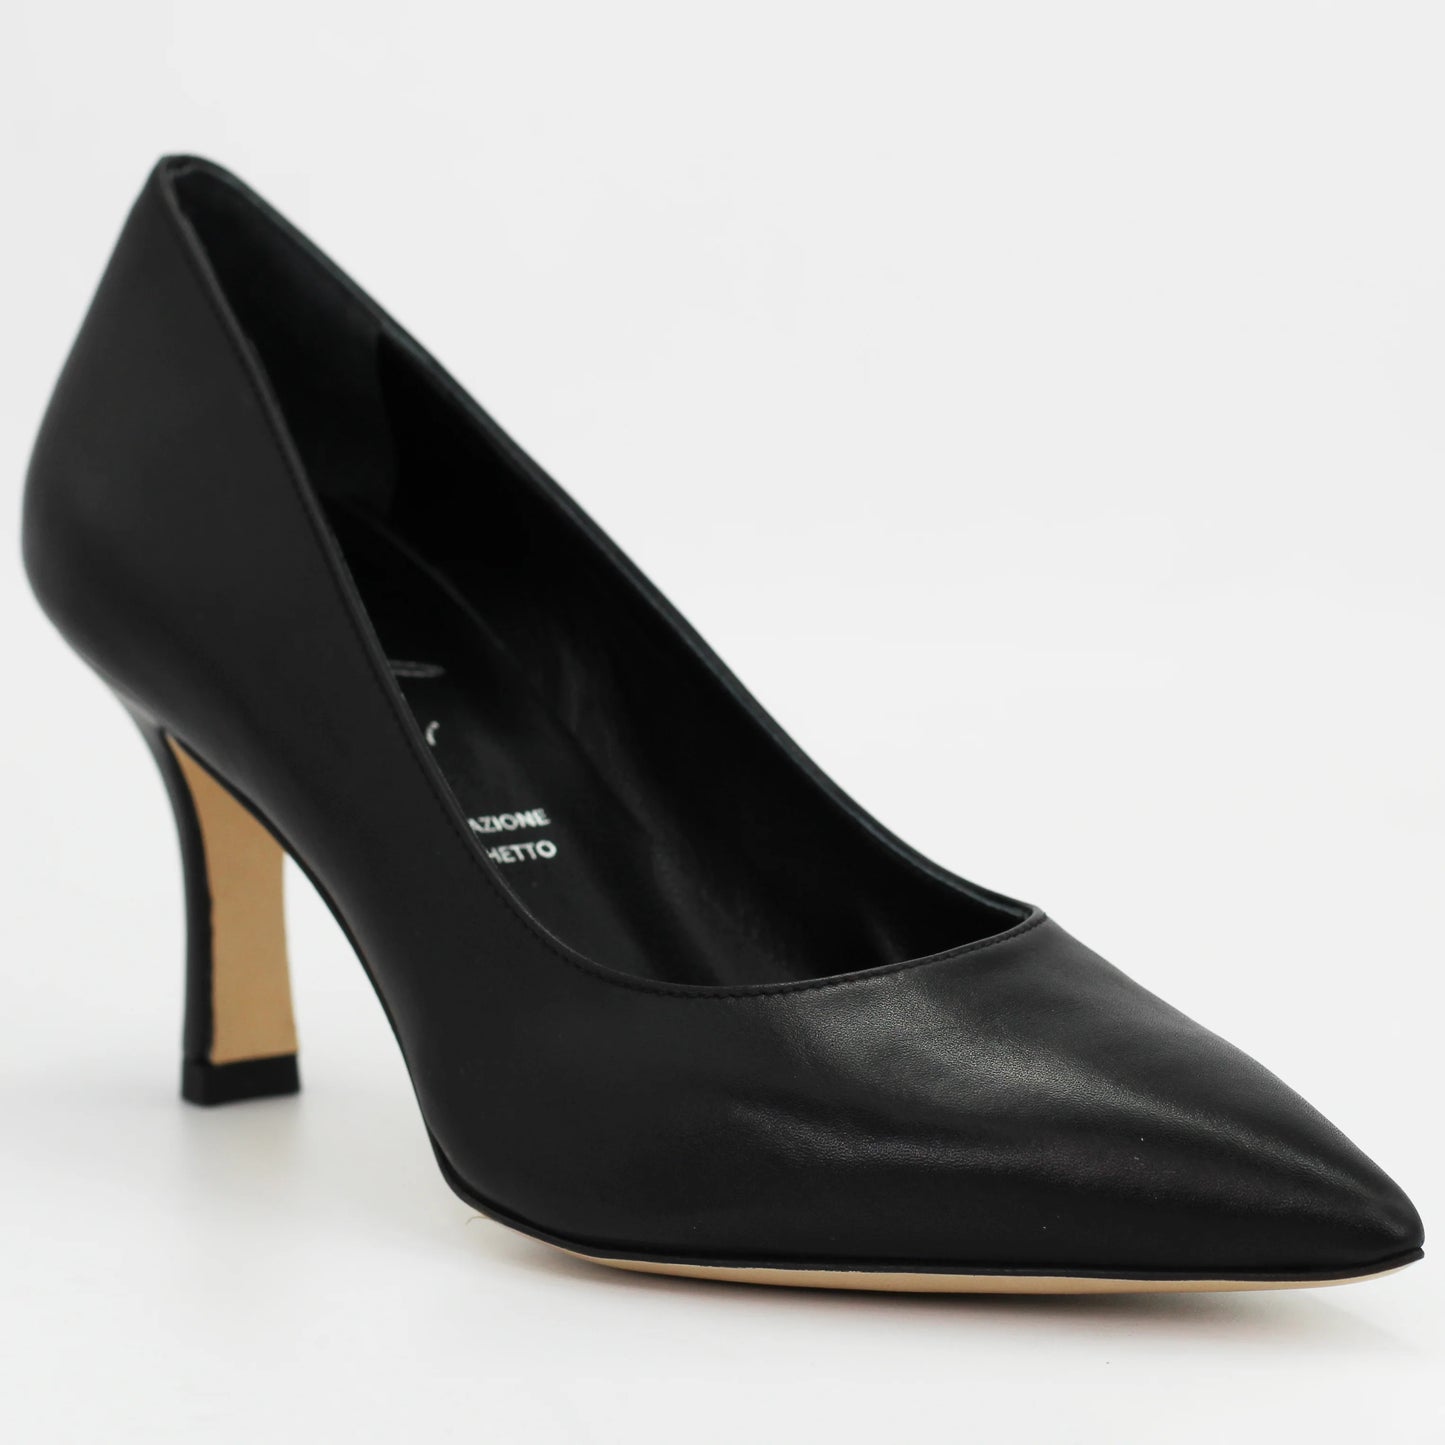 Shop Handmade Italian Leather court heel in black (MA3771) or browse our range of hand-made Italian shoes in leather or suede in-store at Aliverti Cape Town, or shop online. We deliver in South Africa & offer multiple payment plans as well as accept multiple safe & secure payment methods.